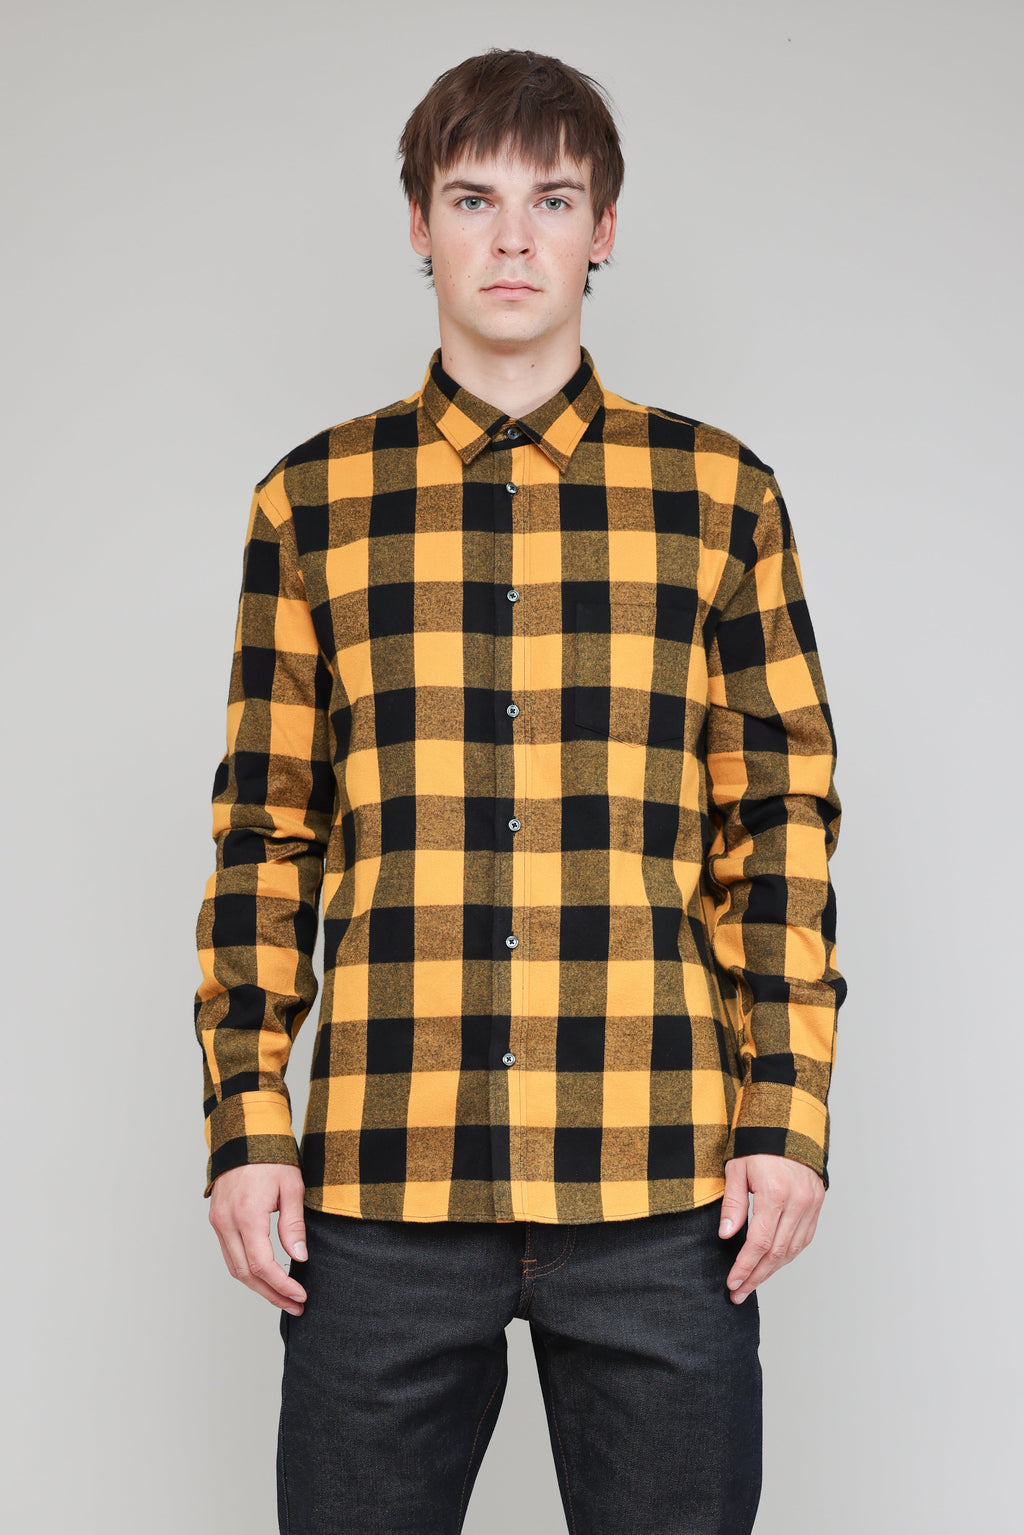 Japanese Brushed Buffalo Plaid in Yellow and Black 01